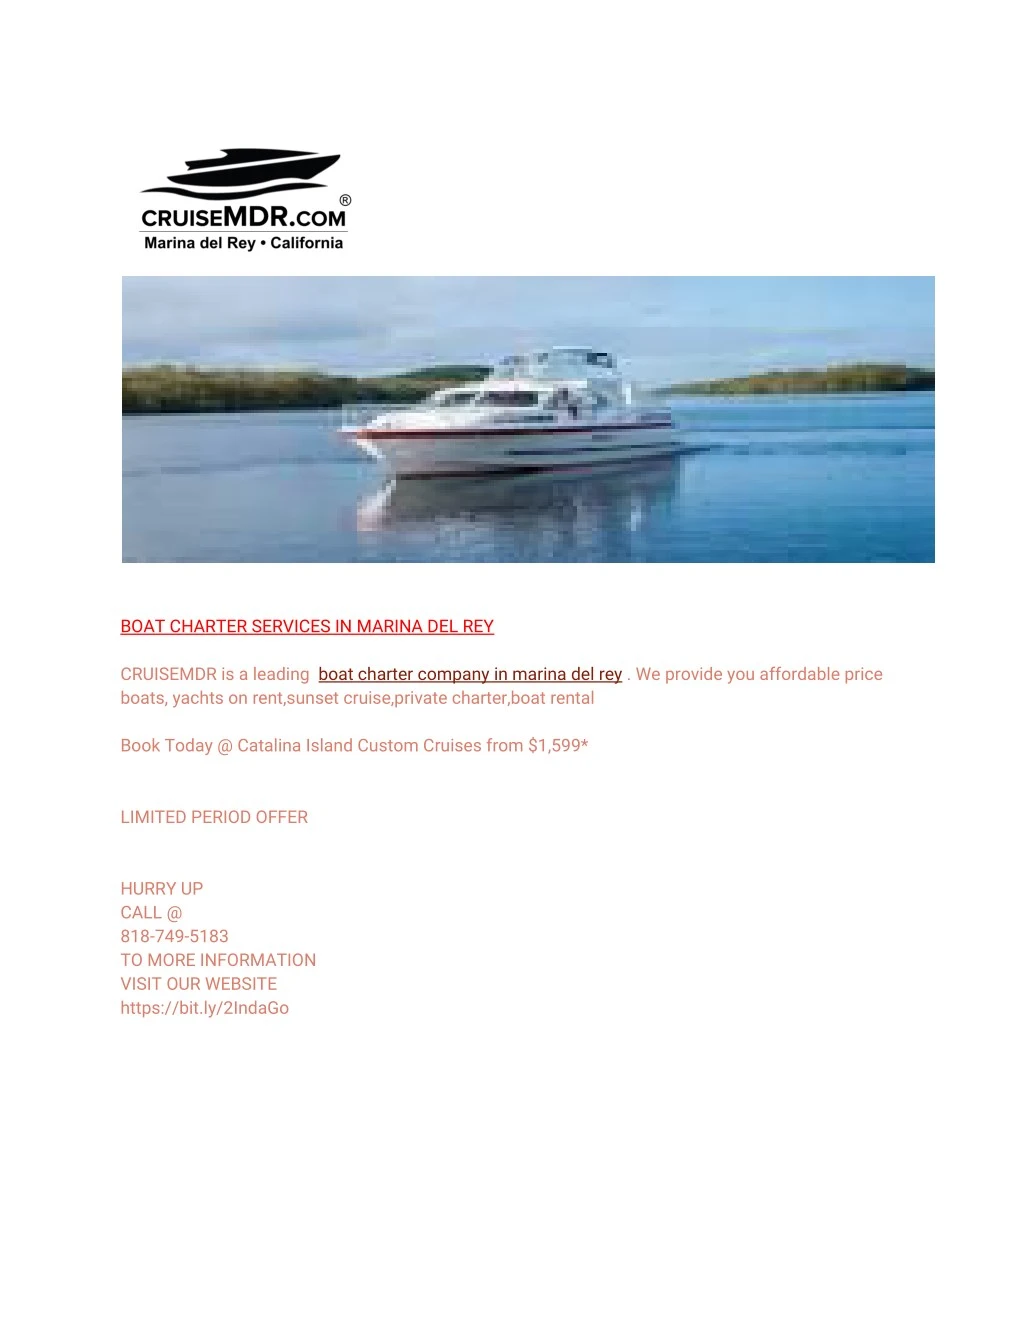 boat charter services in marina del rey cruisemdr